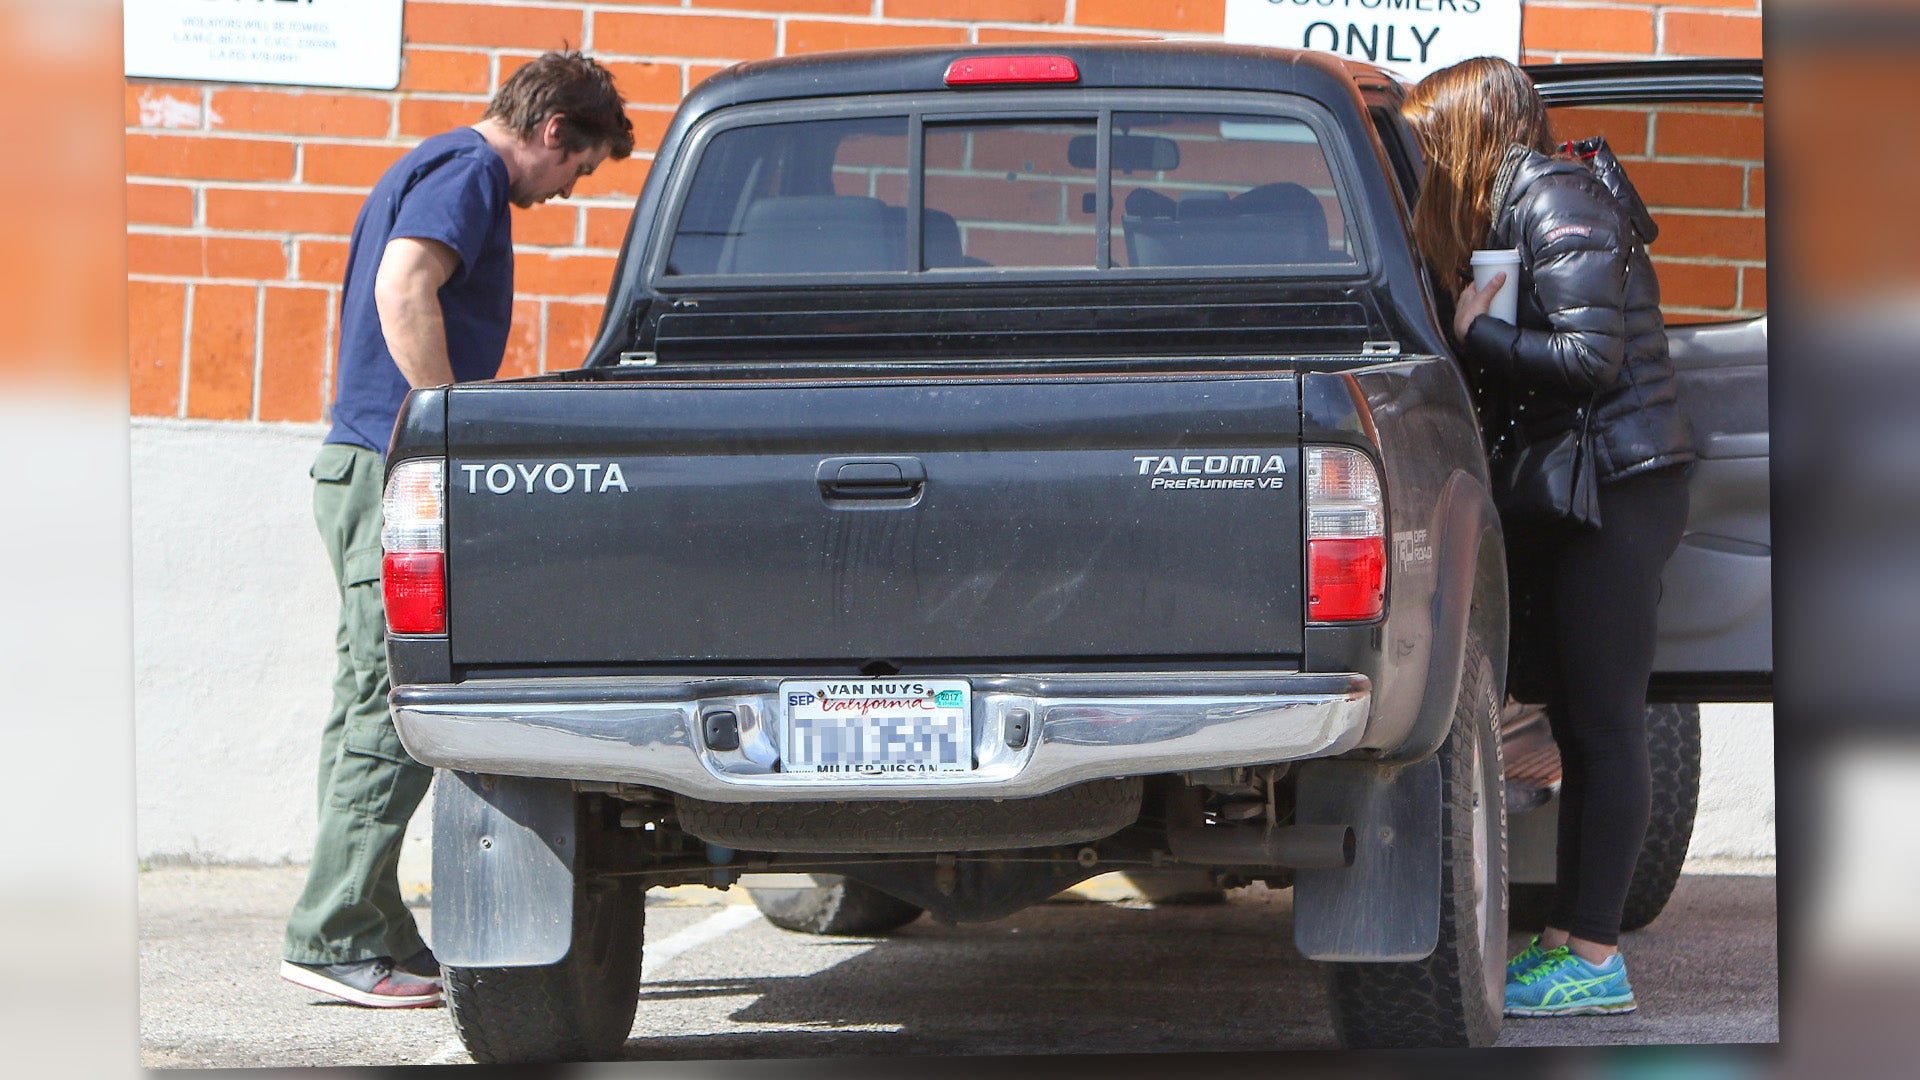 Christian Bale Uses an Old Toyota Tacoma Truck to Haul Motorcycles